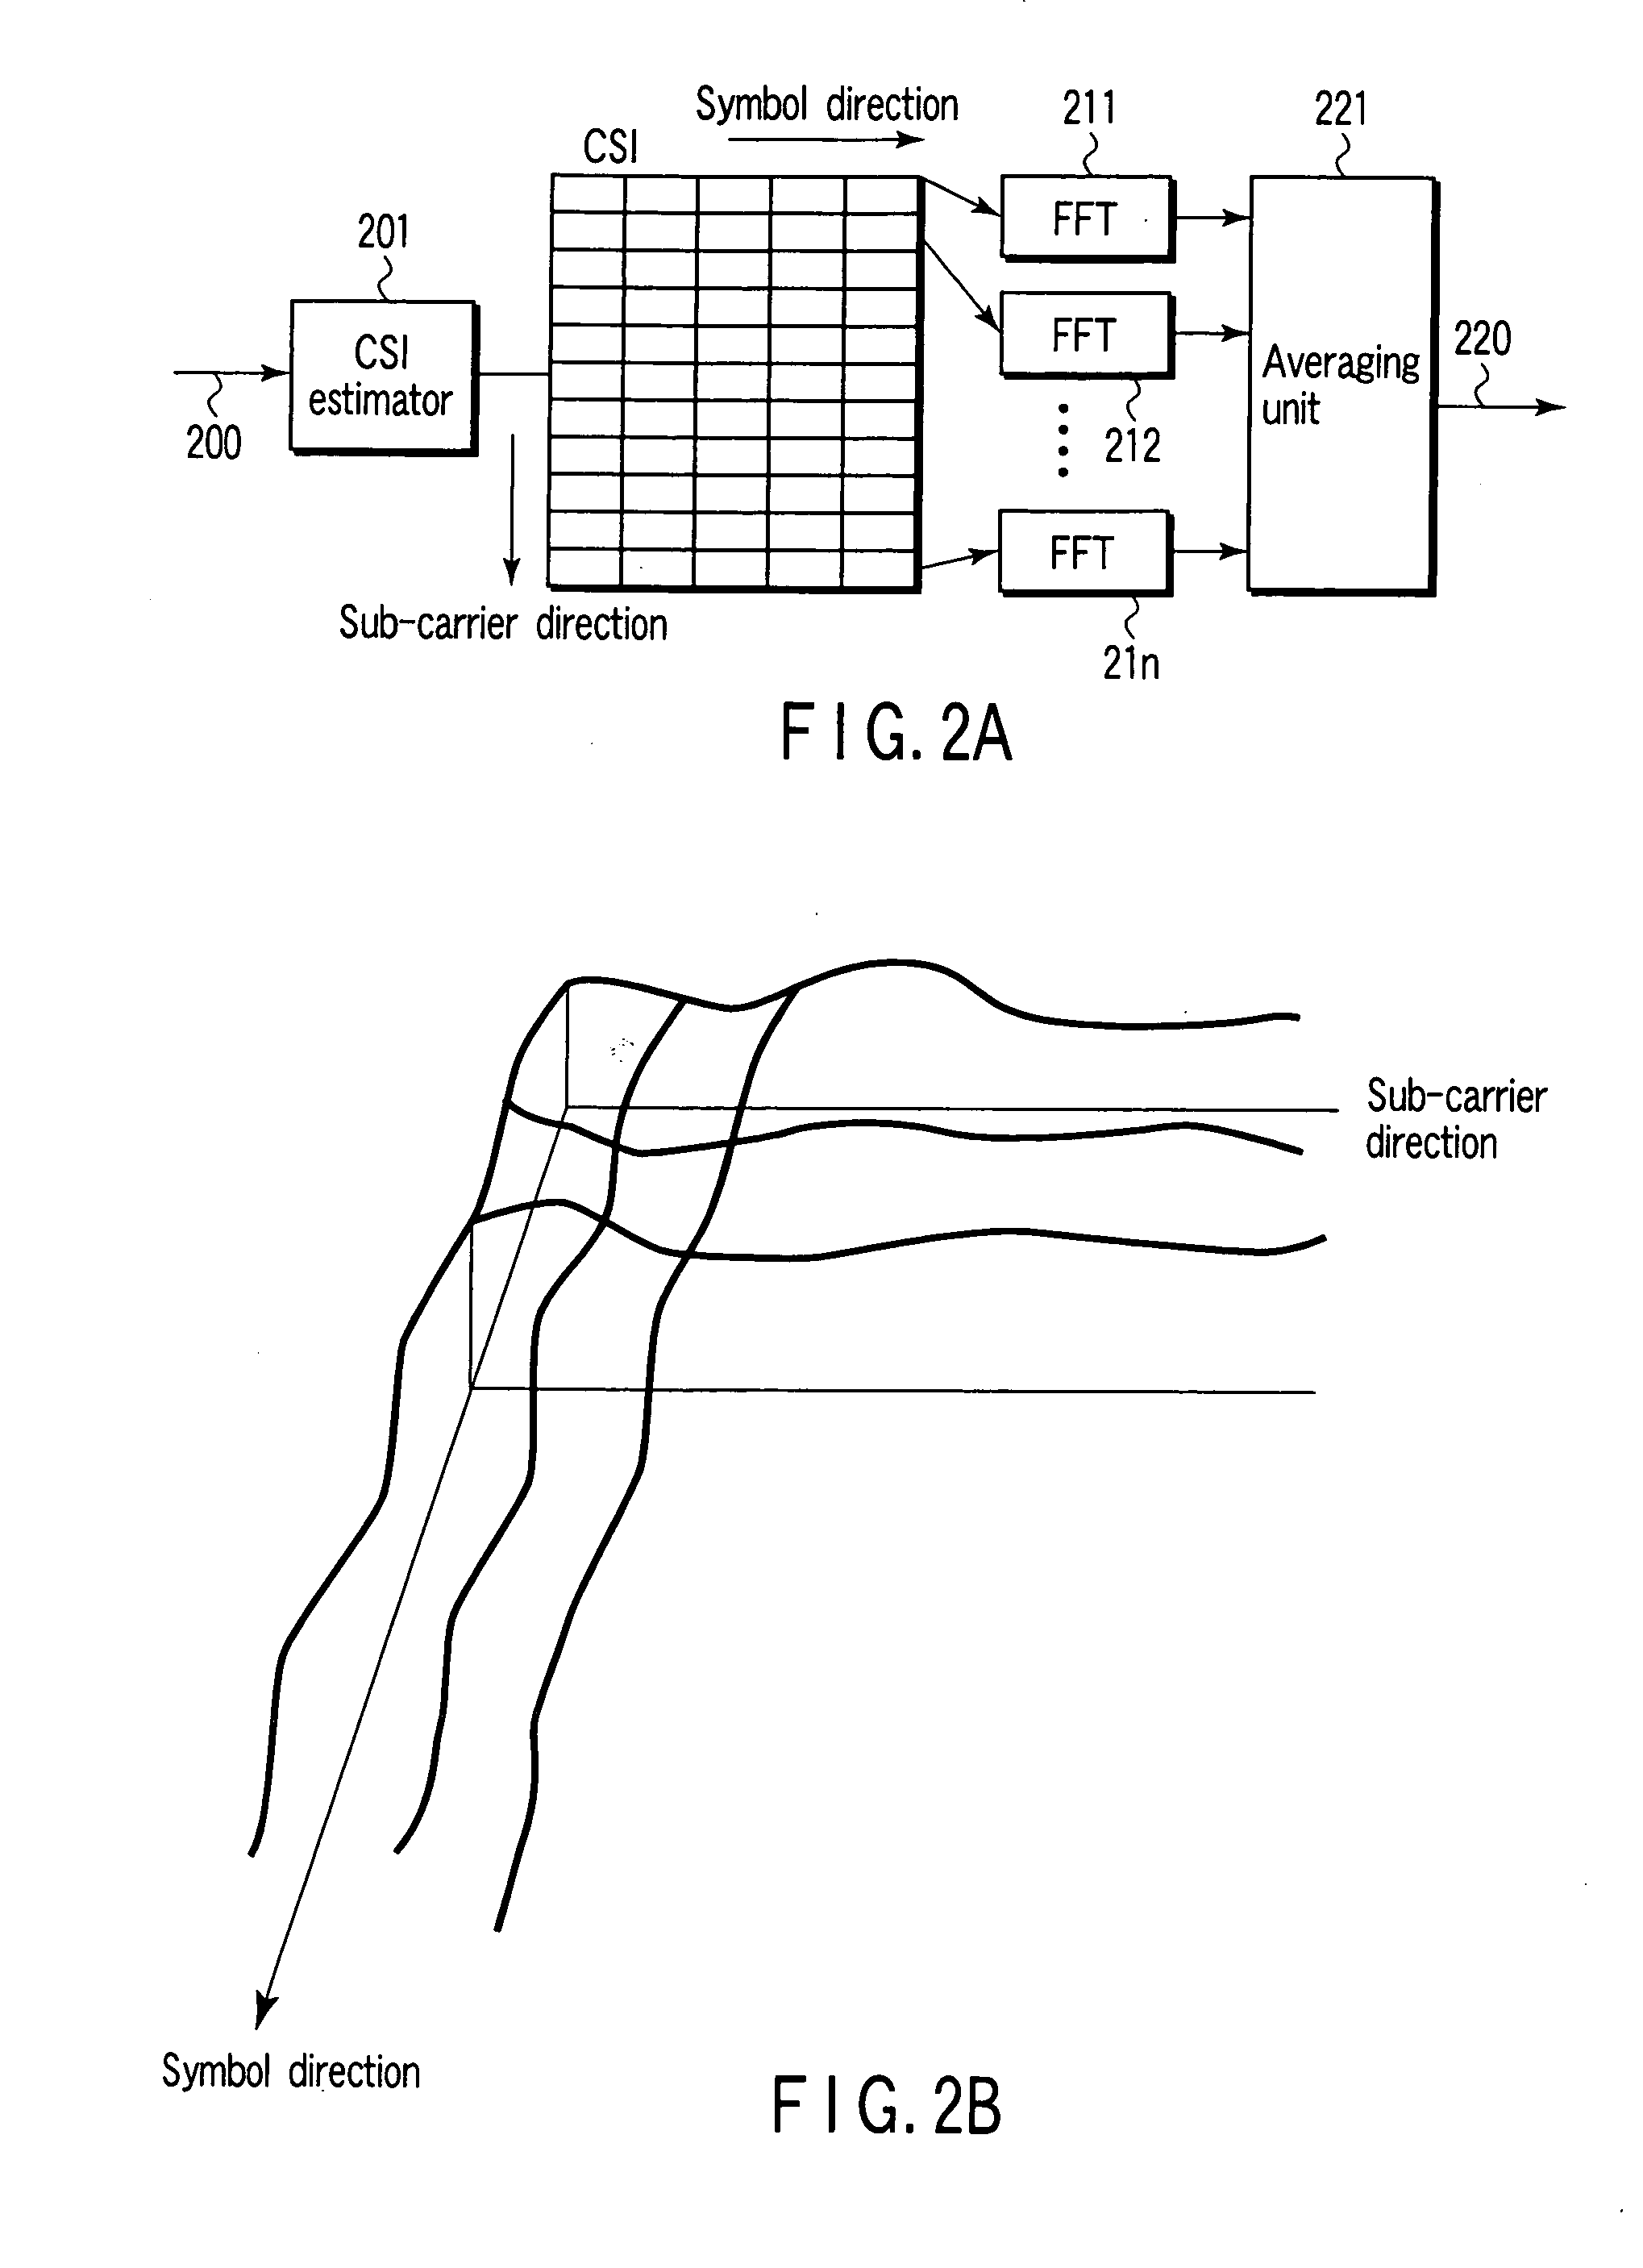 Orthogonal frequency division multiplexing (OFDM) receiver